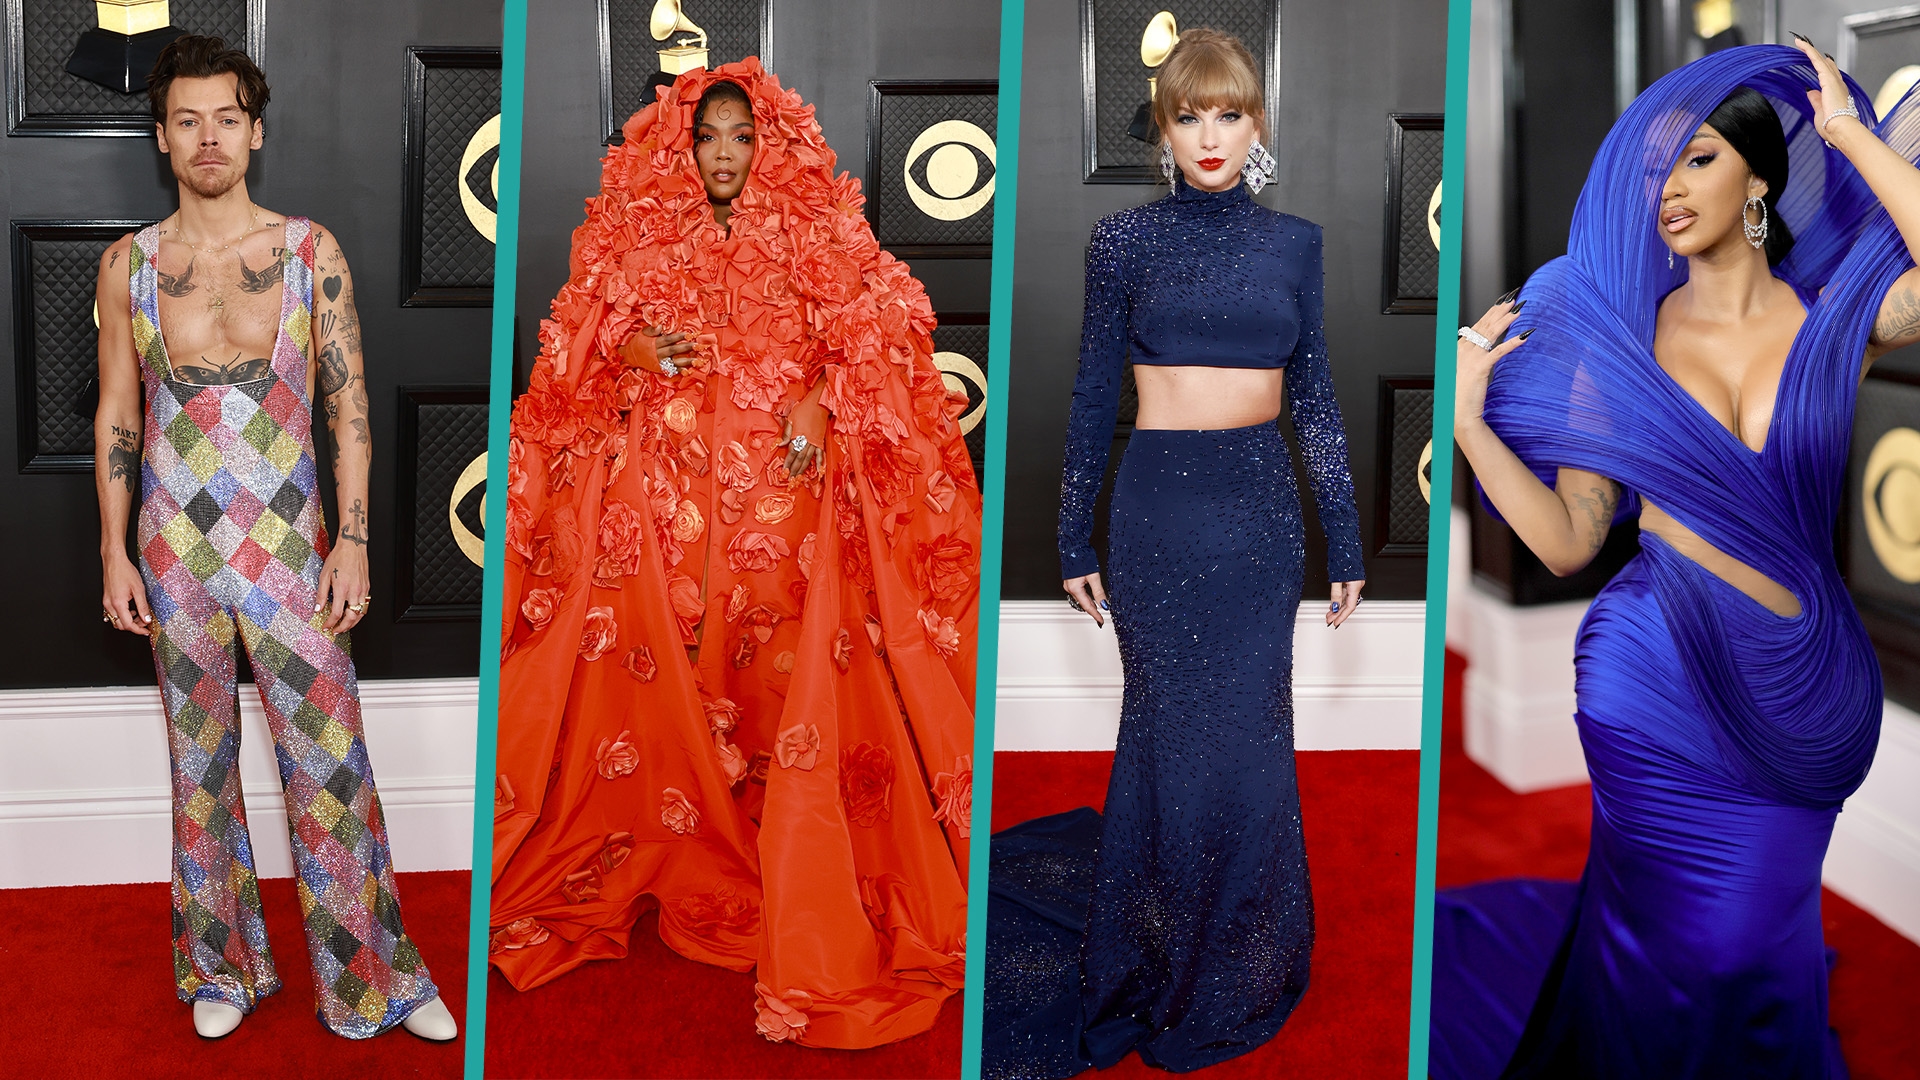 Fashion highlights from the 2023 Grammy Awards – The Spectator